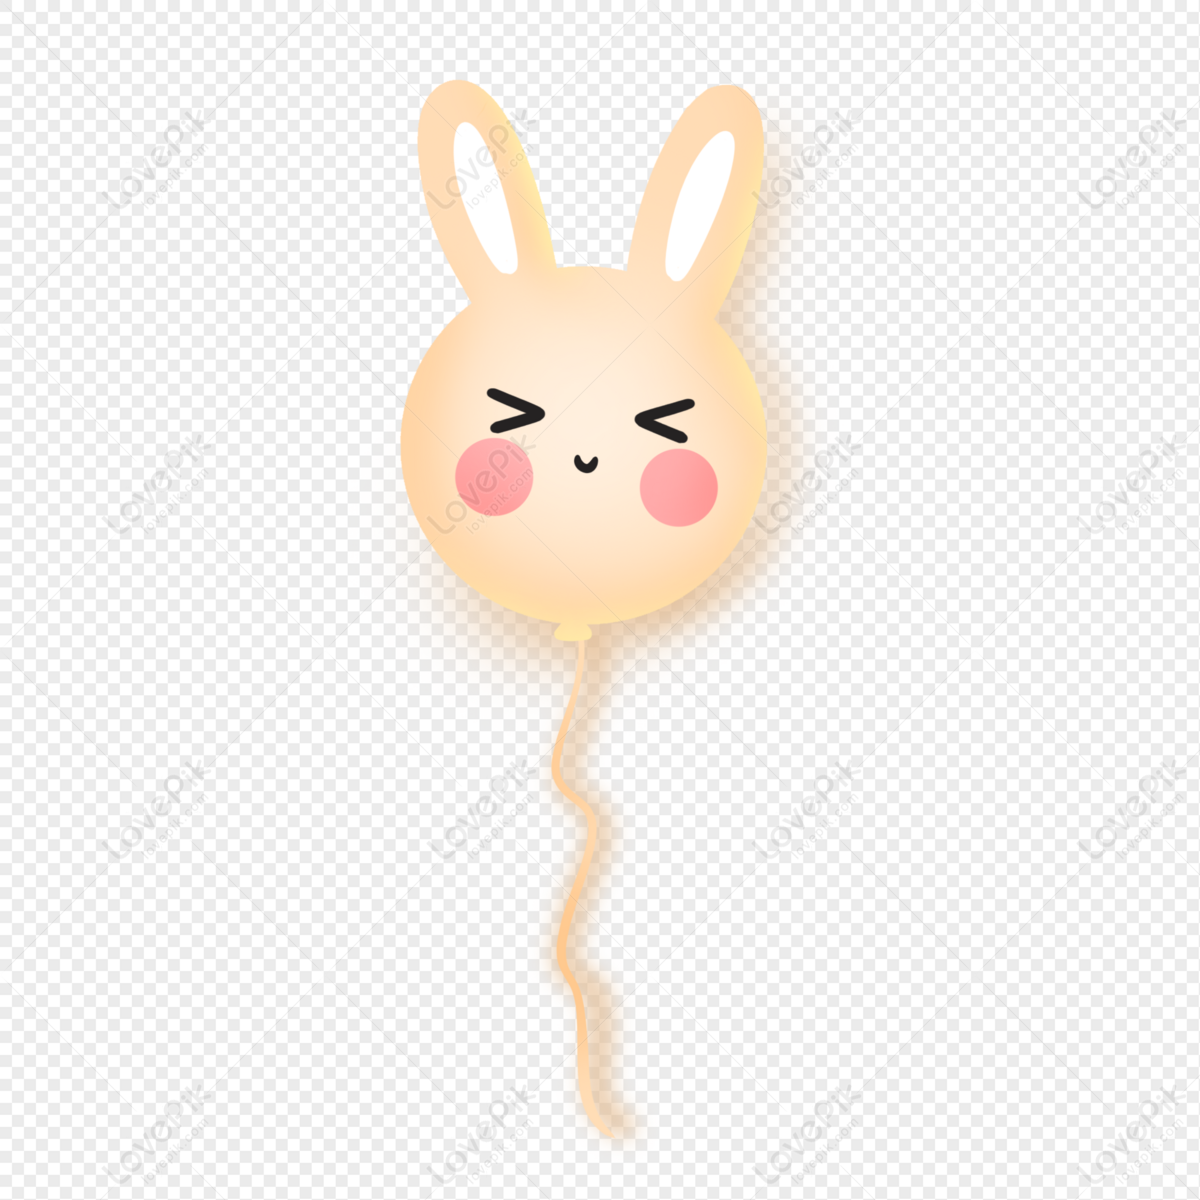 Yellow Rabbit Balloon Free PNG And Clipart Image For Free Download ...